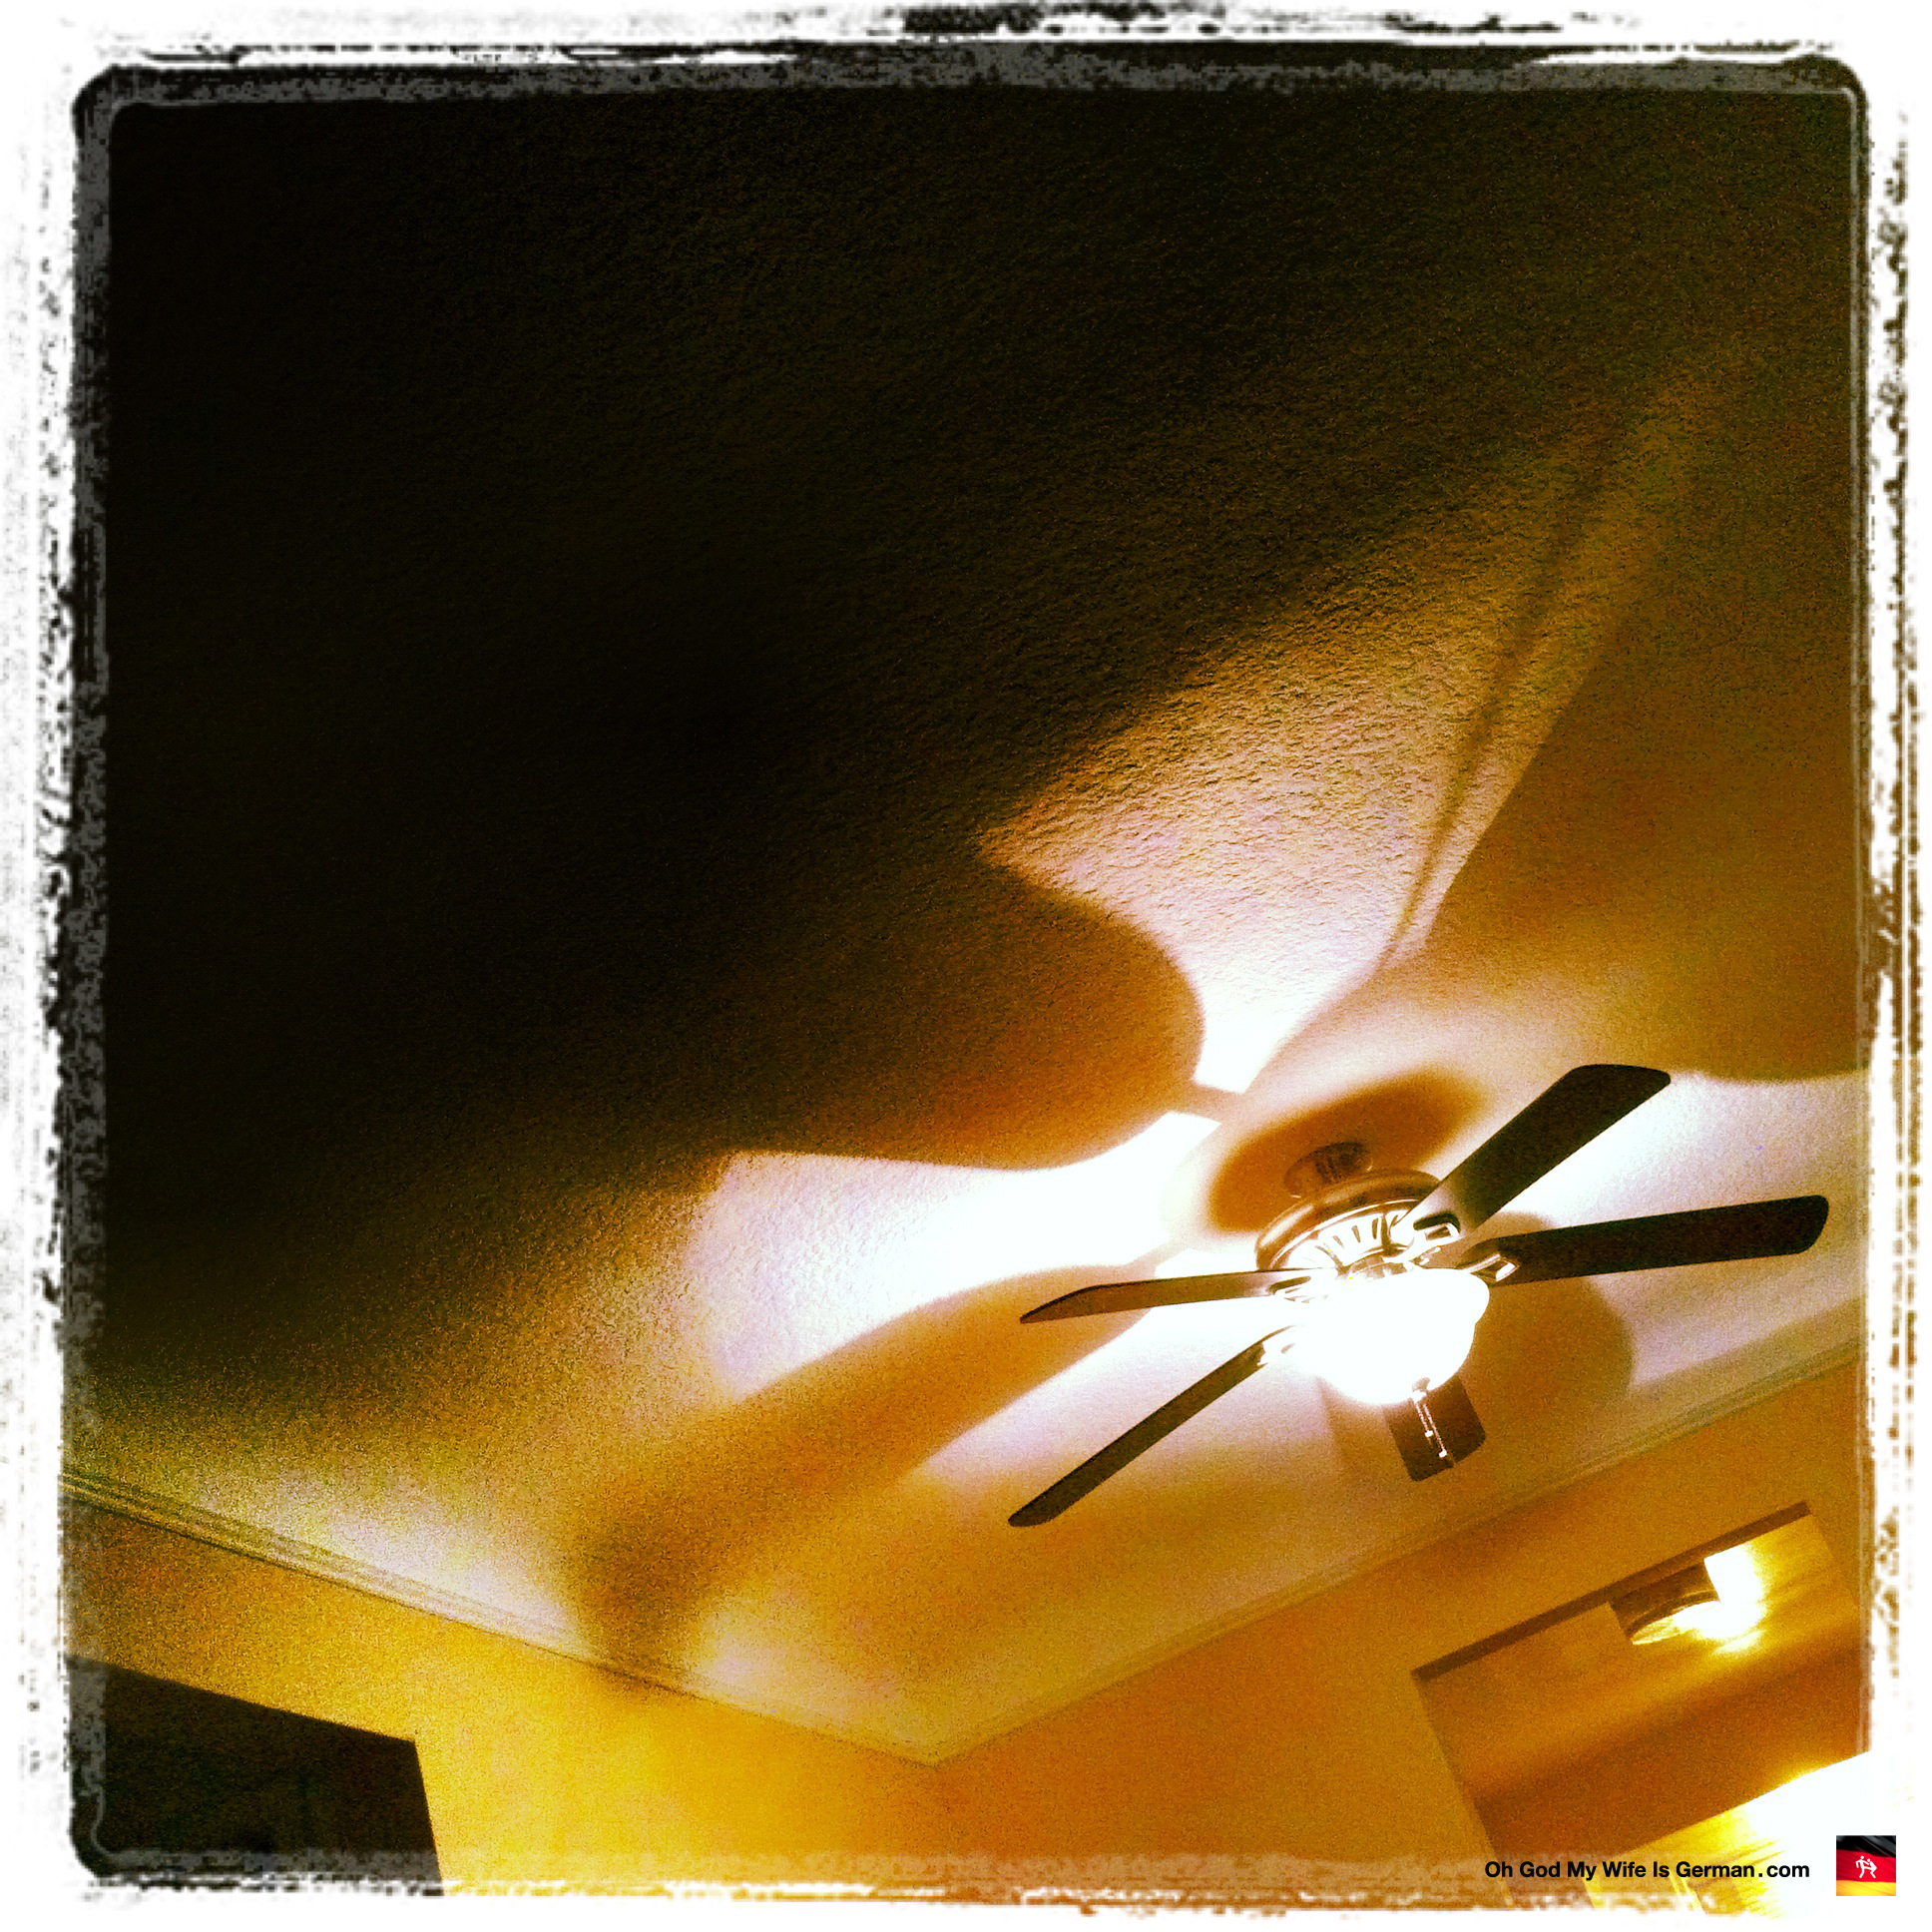 Our ceiling fan, trying to be artsy